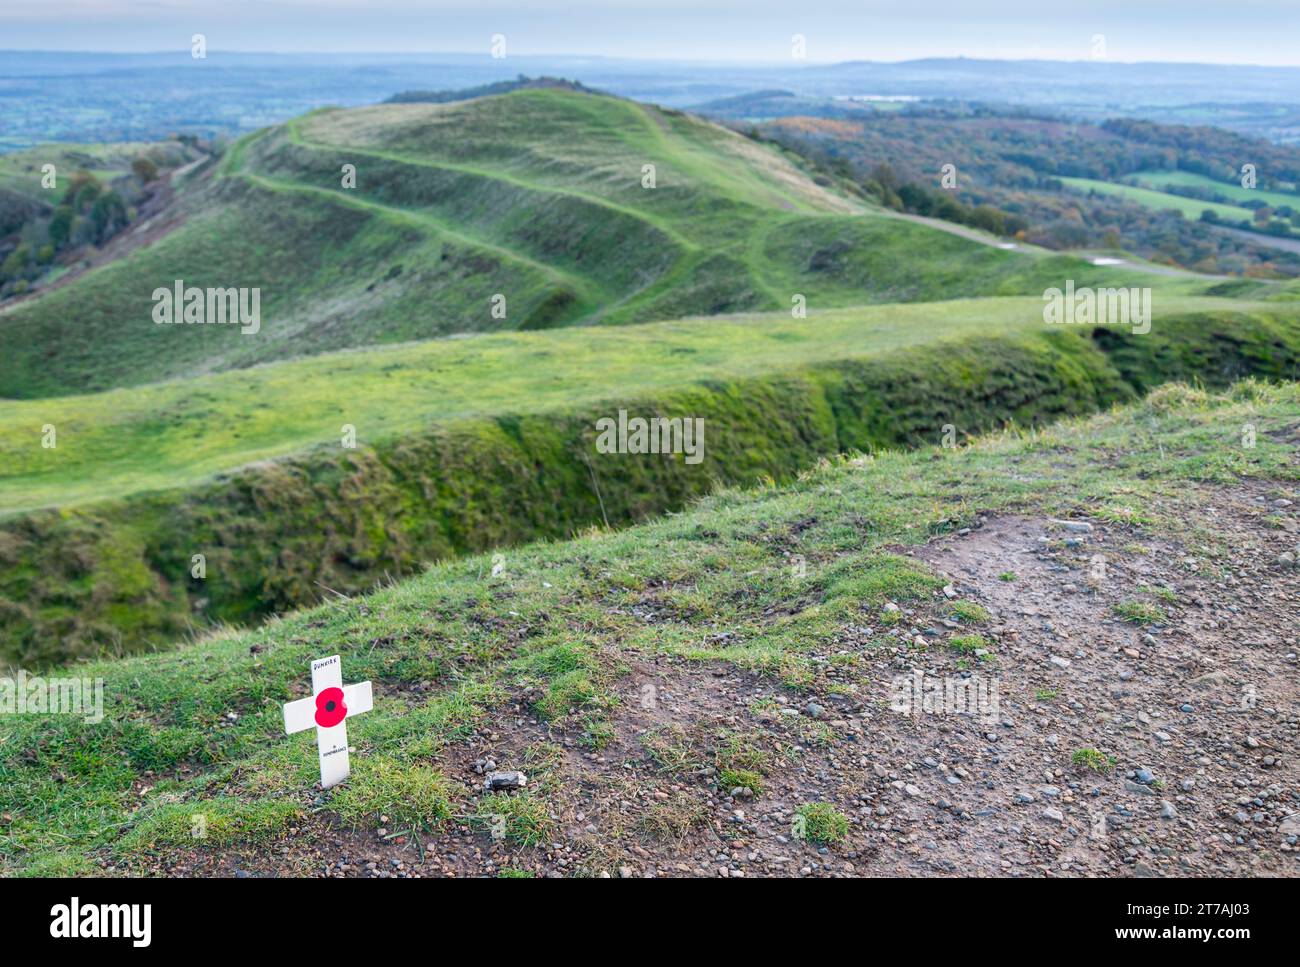 On November 11th,on Armistice day,a memorial tribute,red poppy symbol,placed in the soil atop the ancient Hill Fort,by an anonymous hill walker,at sun Stock Photo